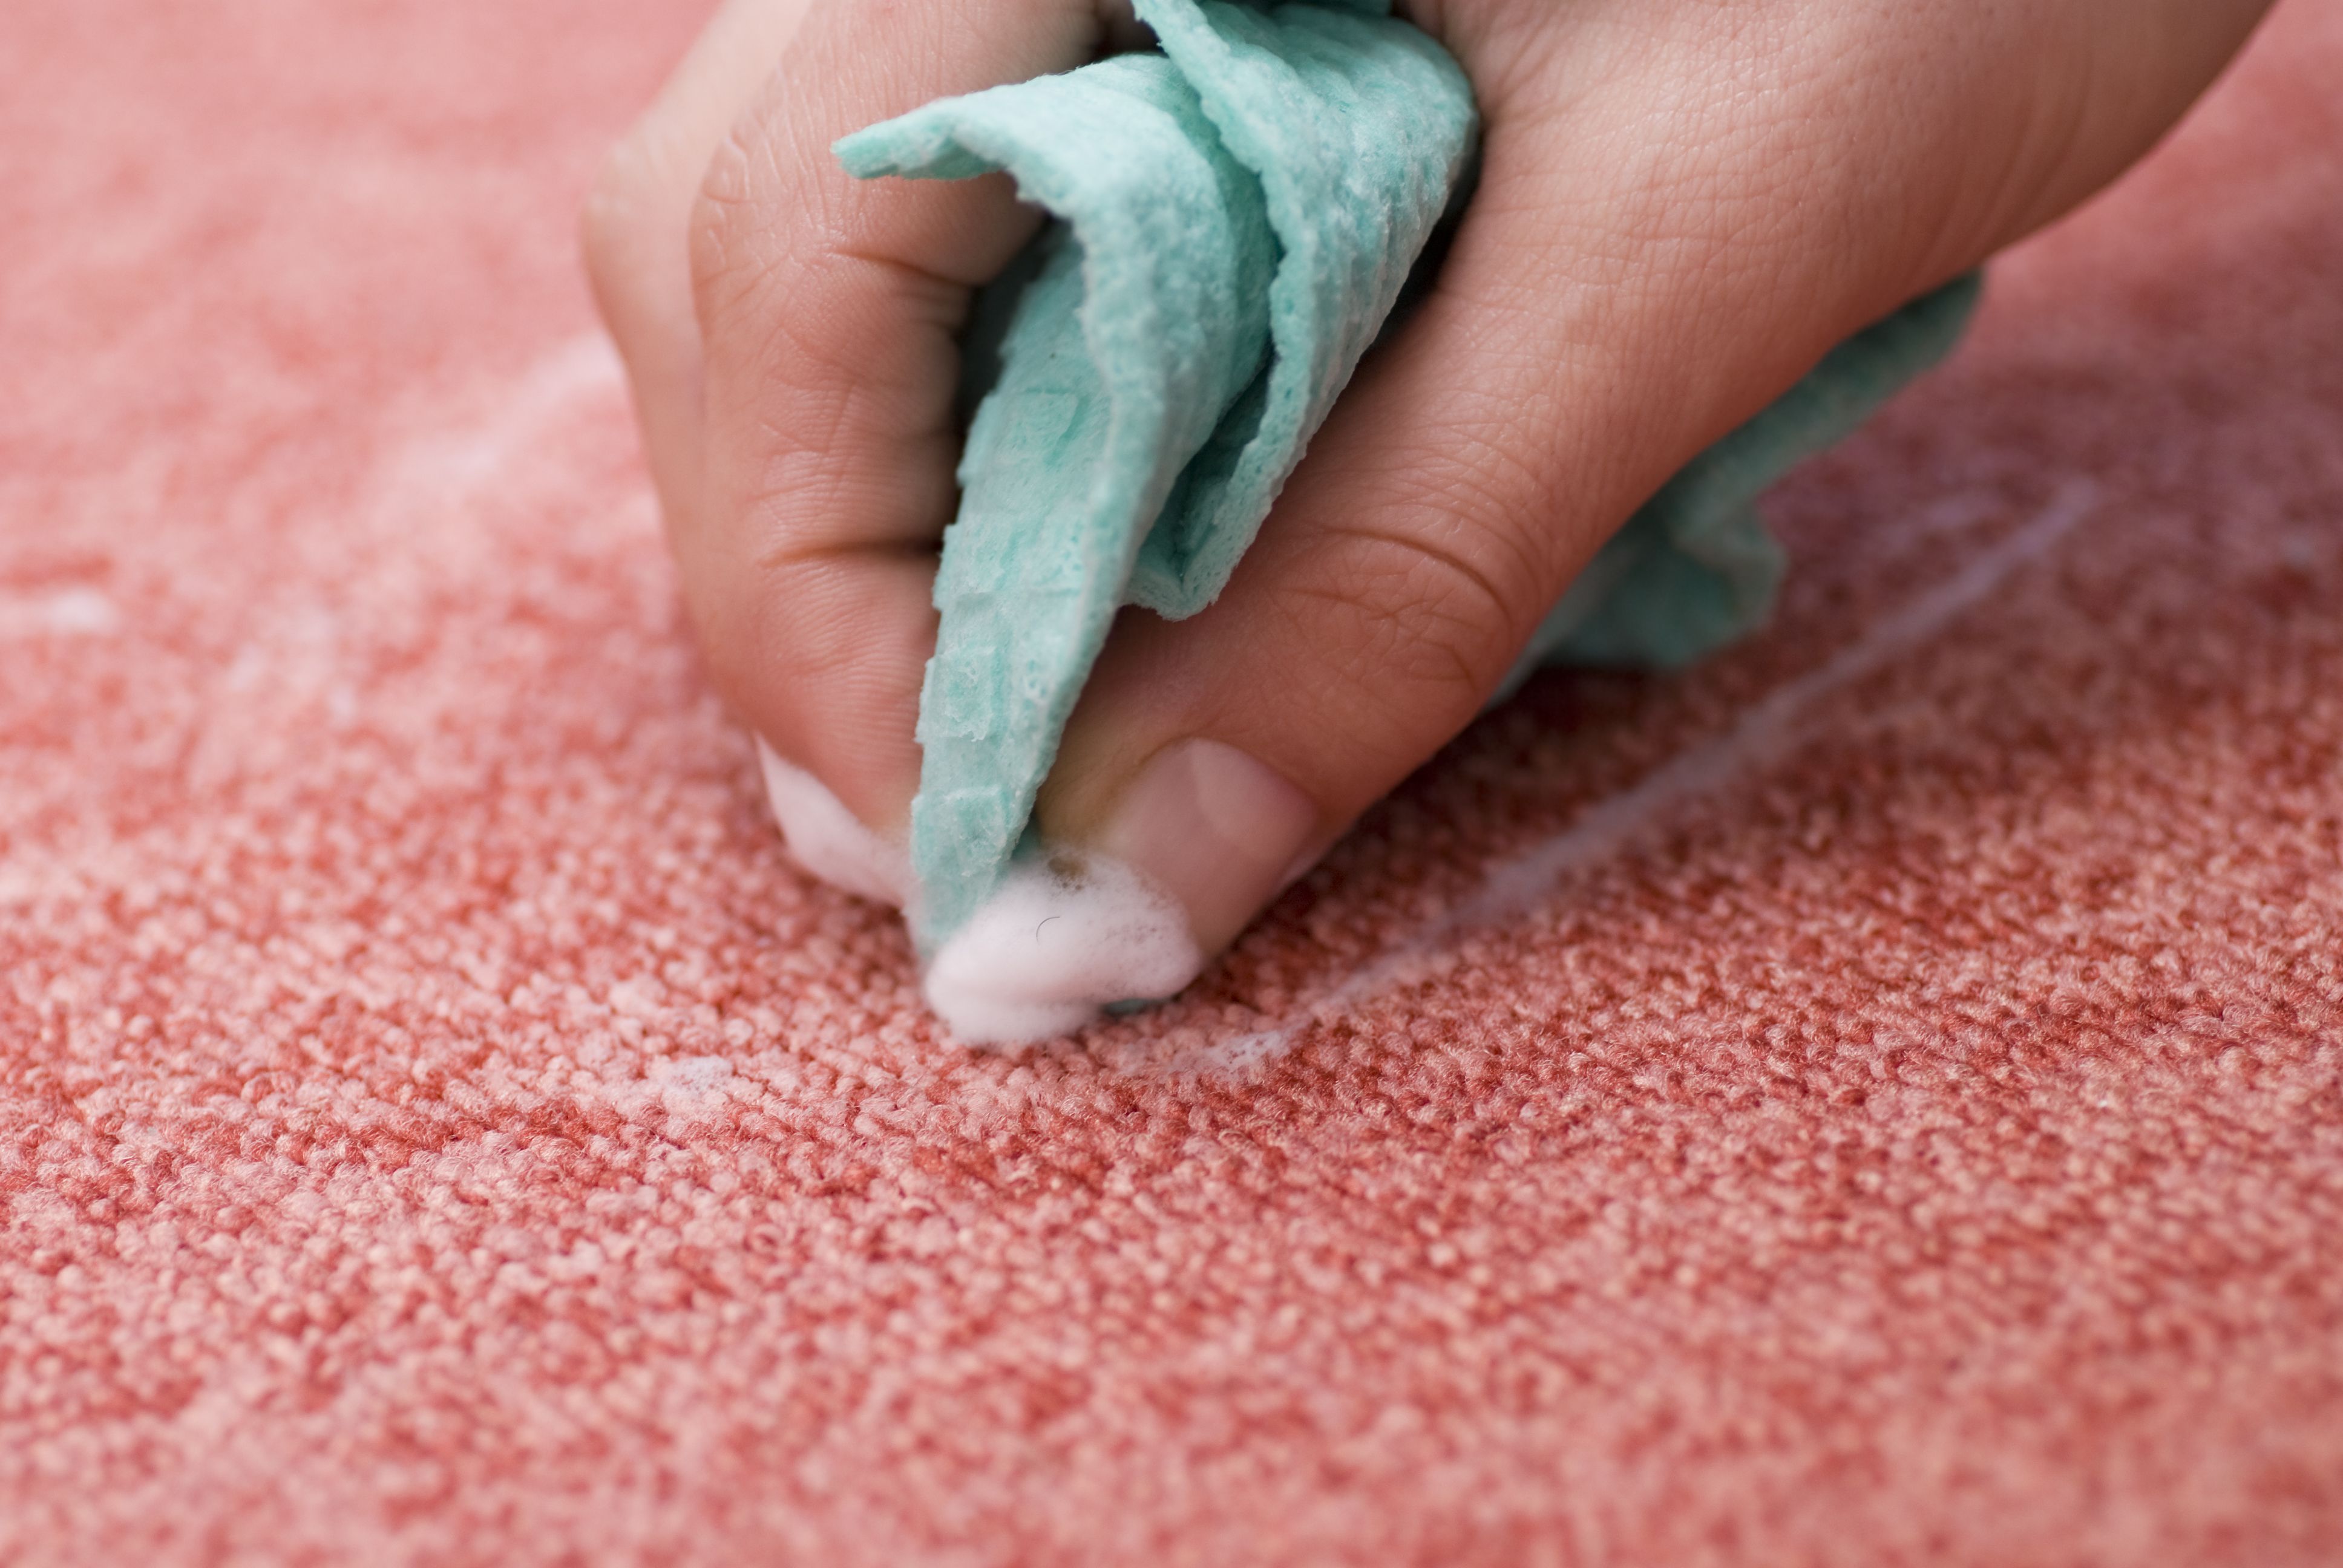 Carpet Cleaning Coventry